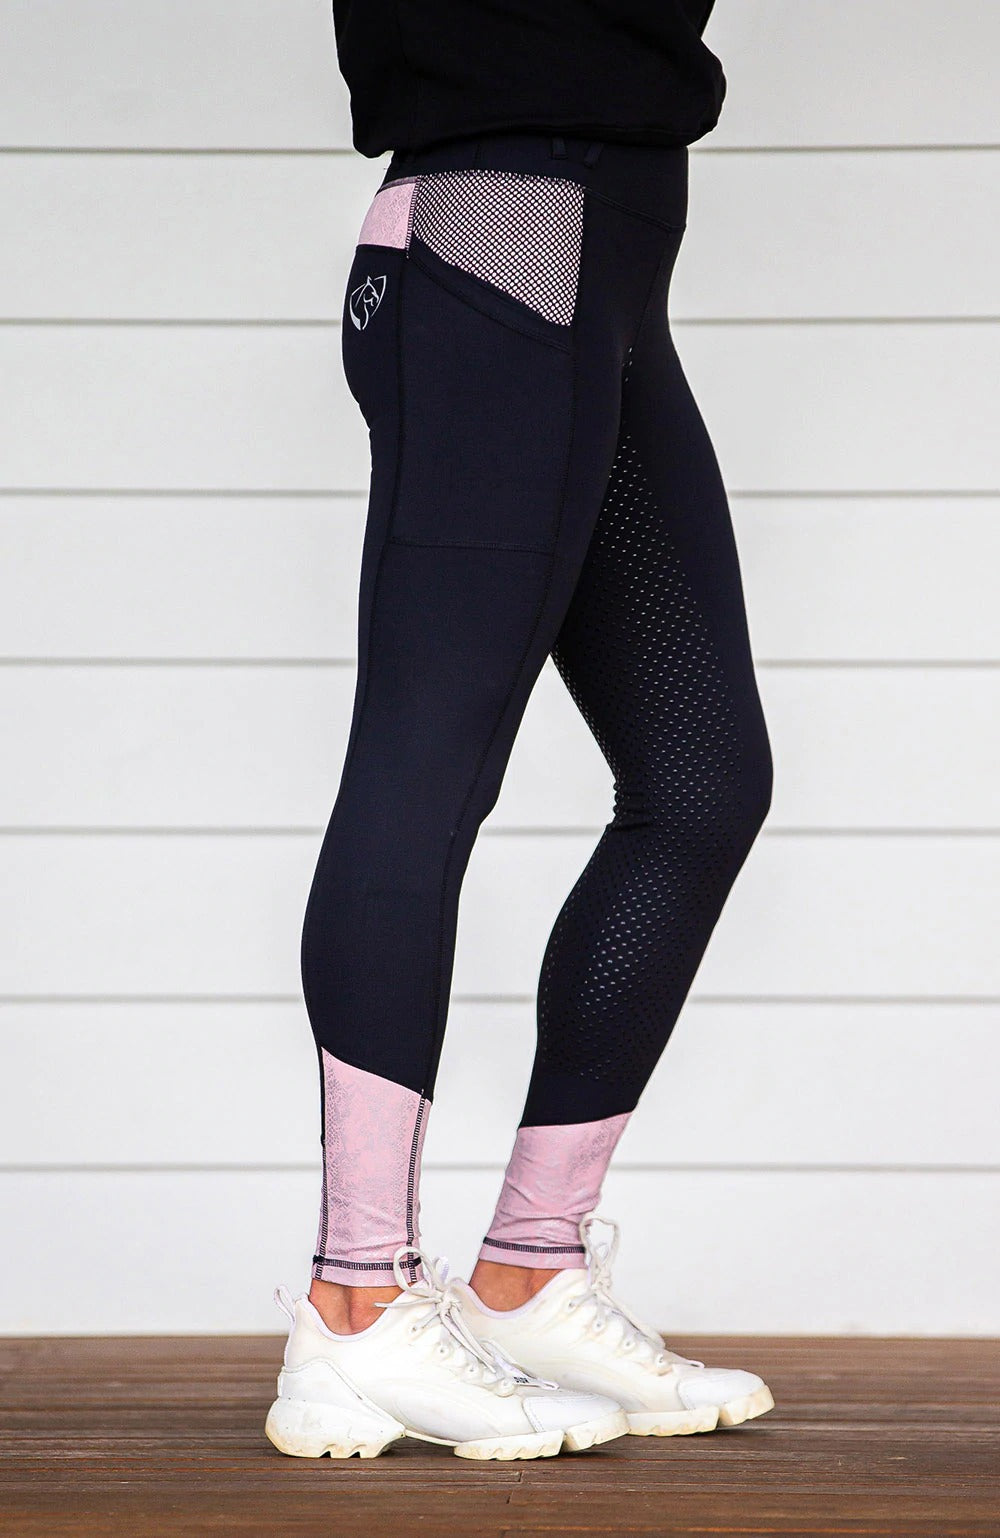 BARE Youth Performance Riding Tights - Rose